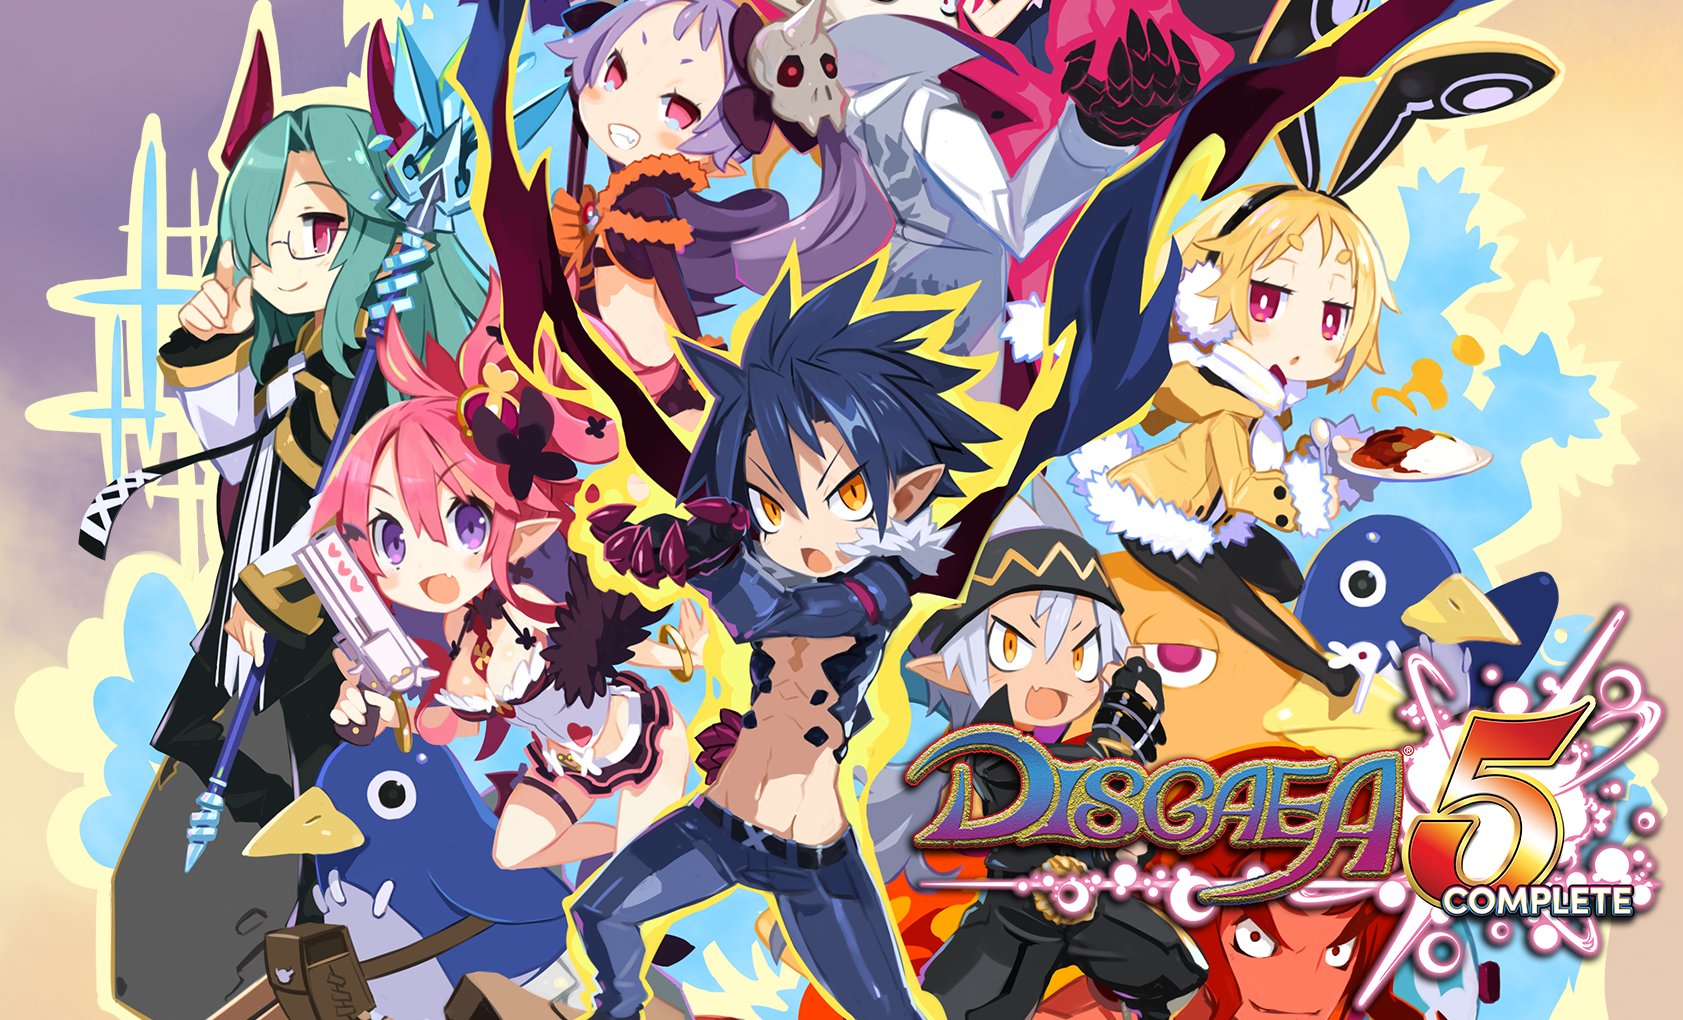 Disgaea 5 Complete is Delayed to Fall 2018